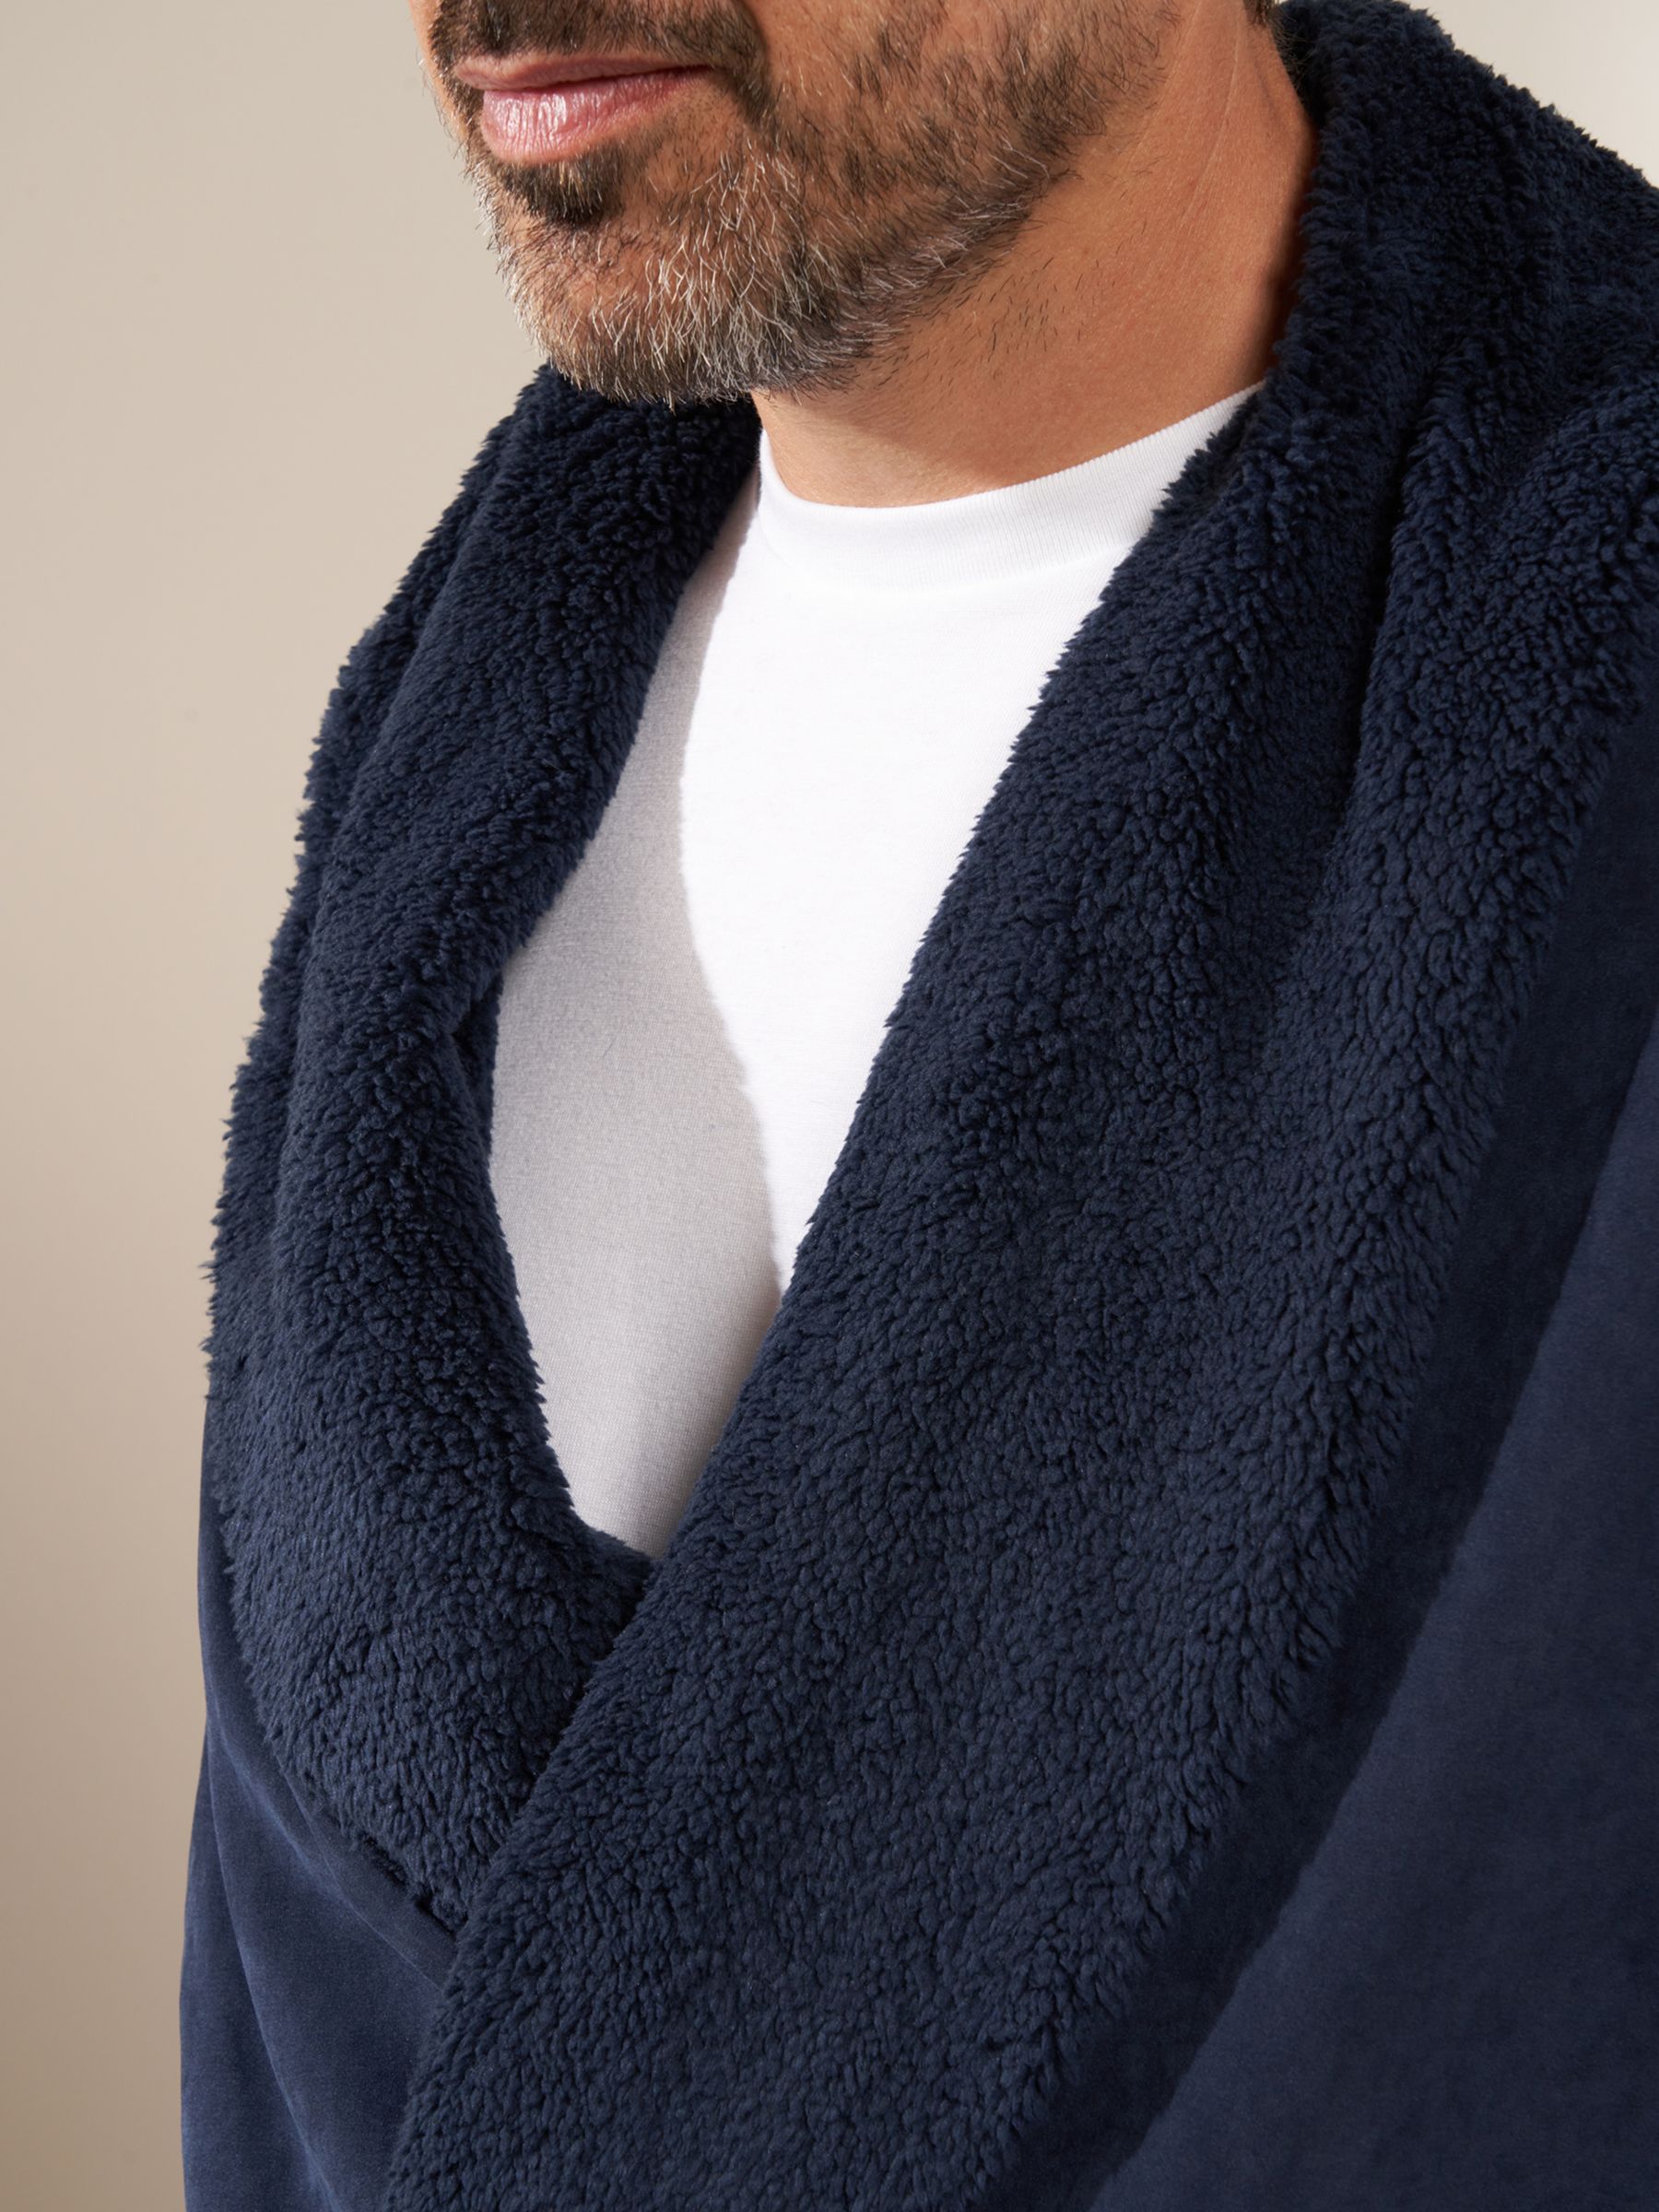 Truly Fleece Lined Dressing Gown, Midnight, S-M